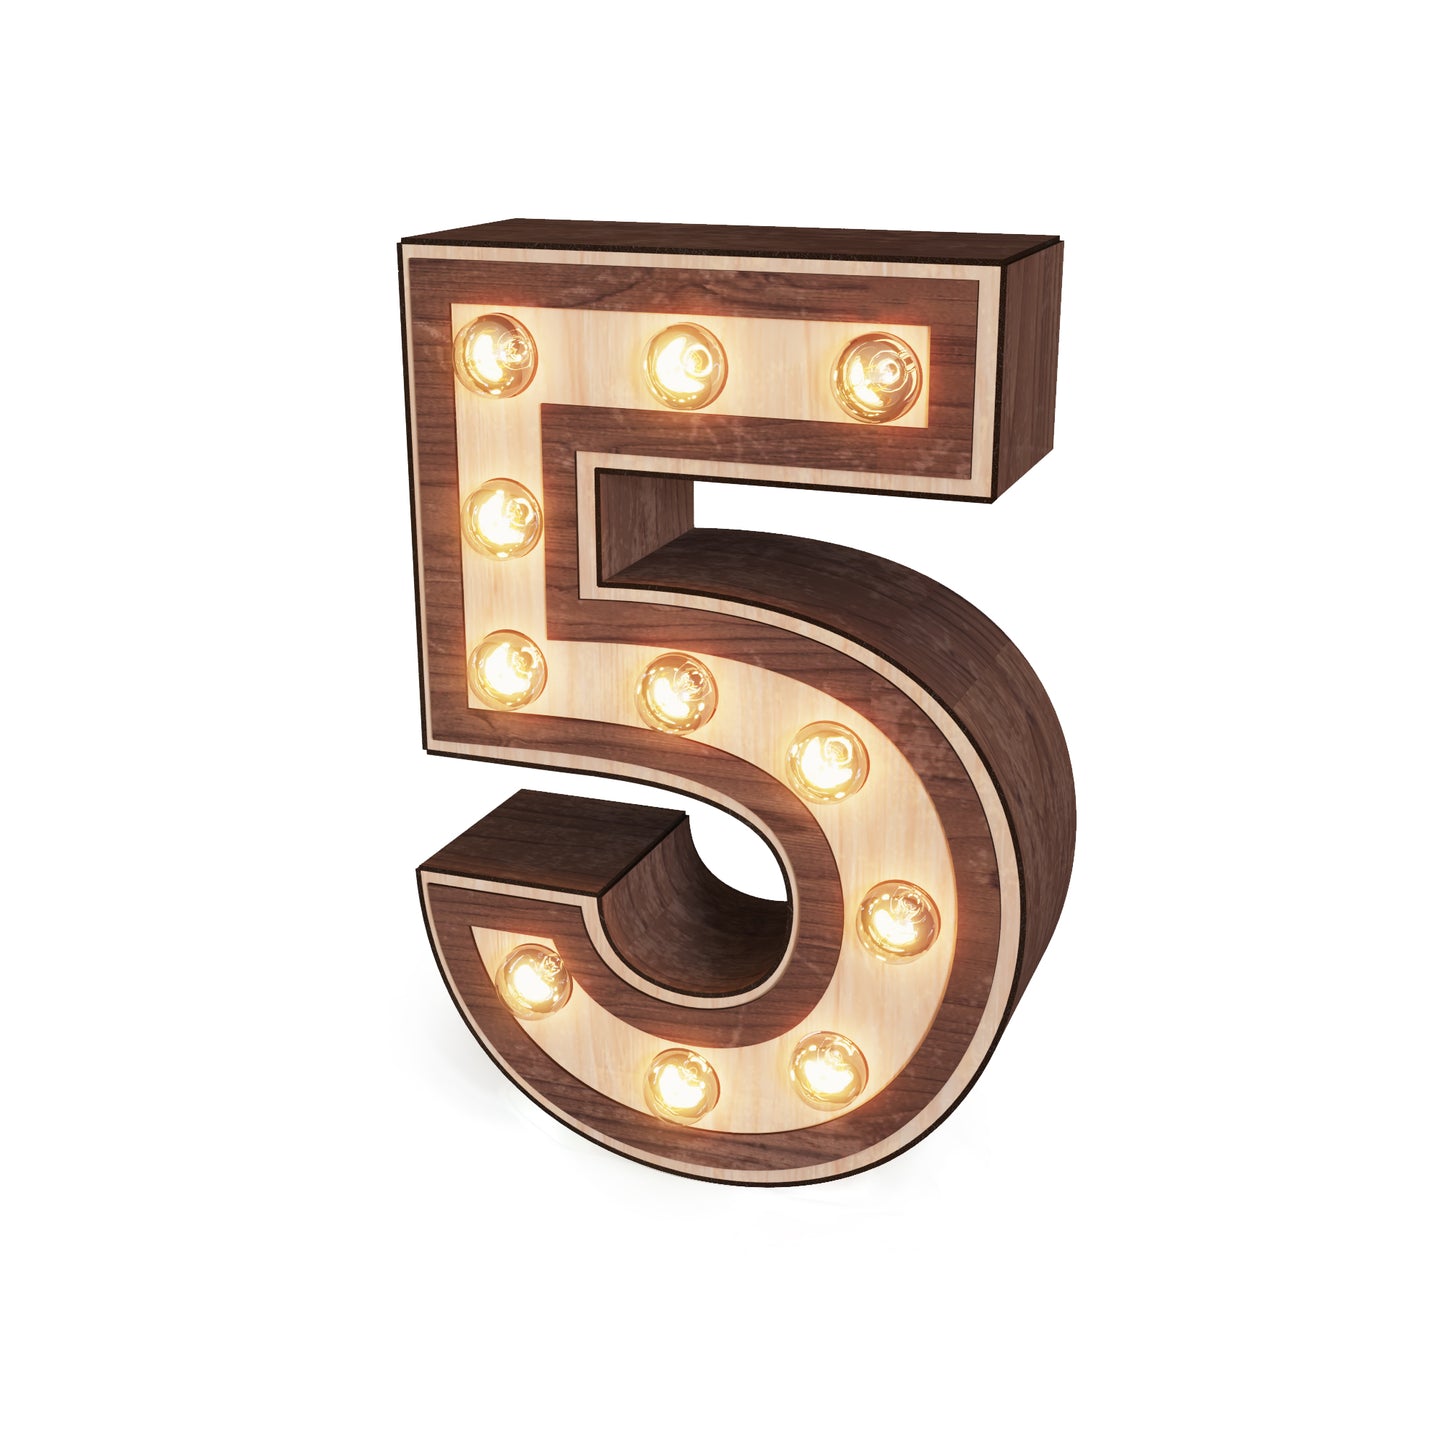 Light-up Marquee Number Display "5"